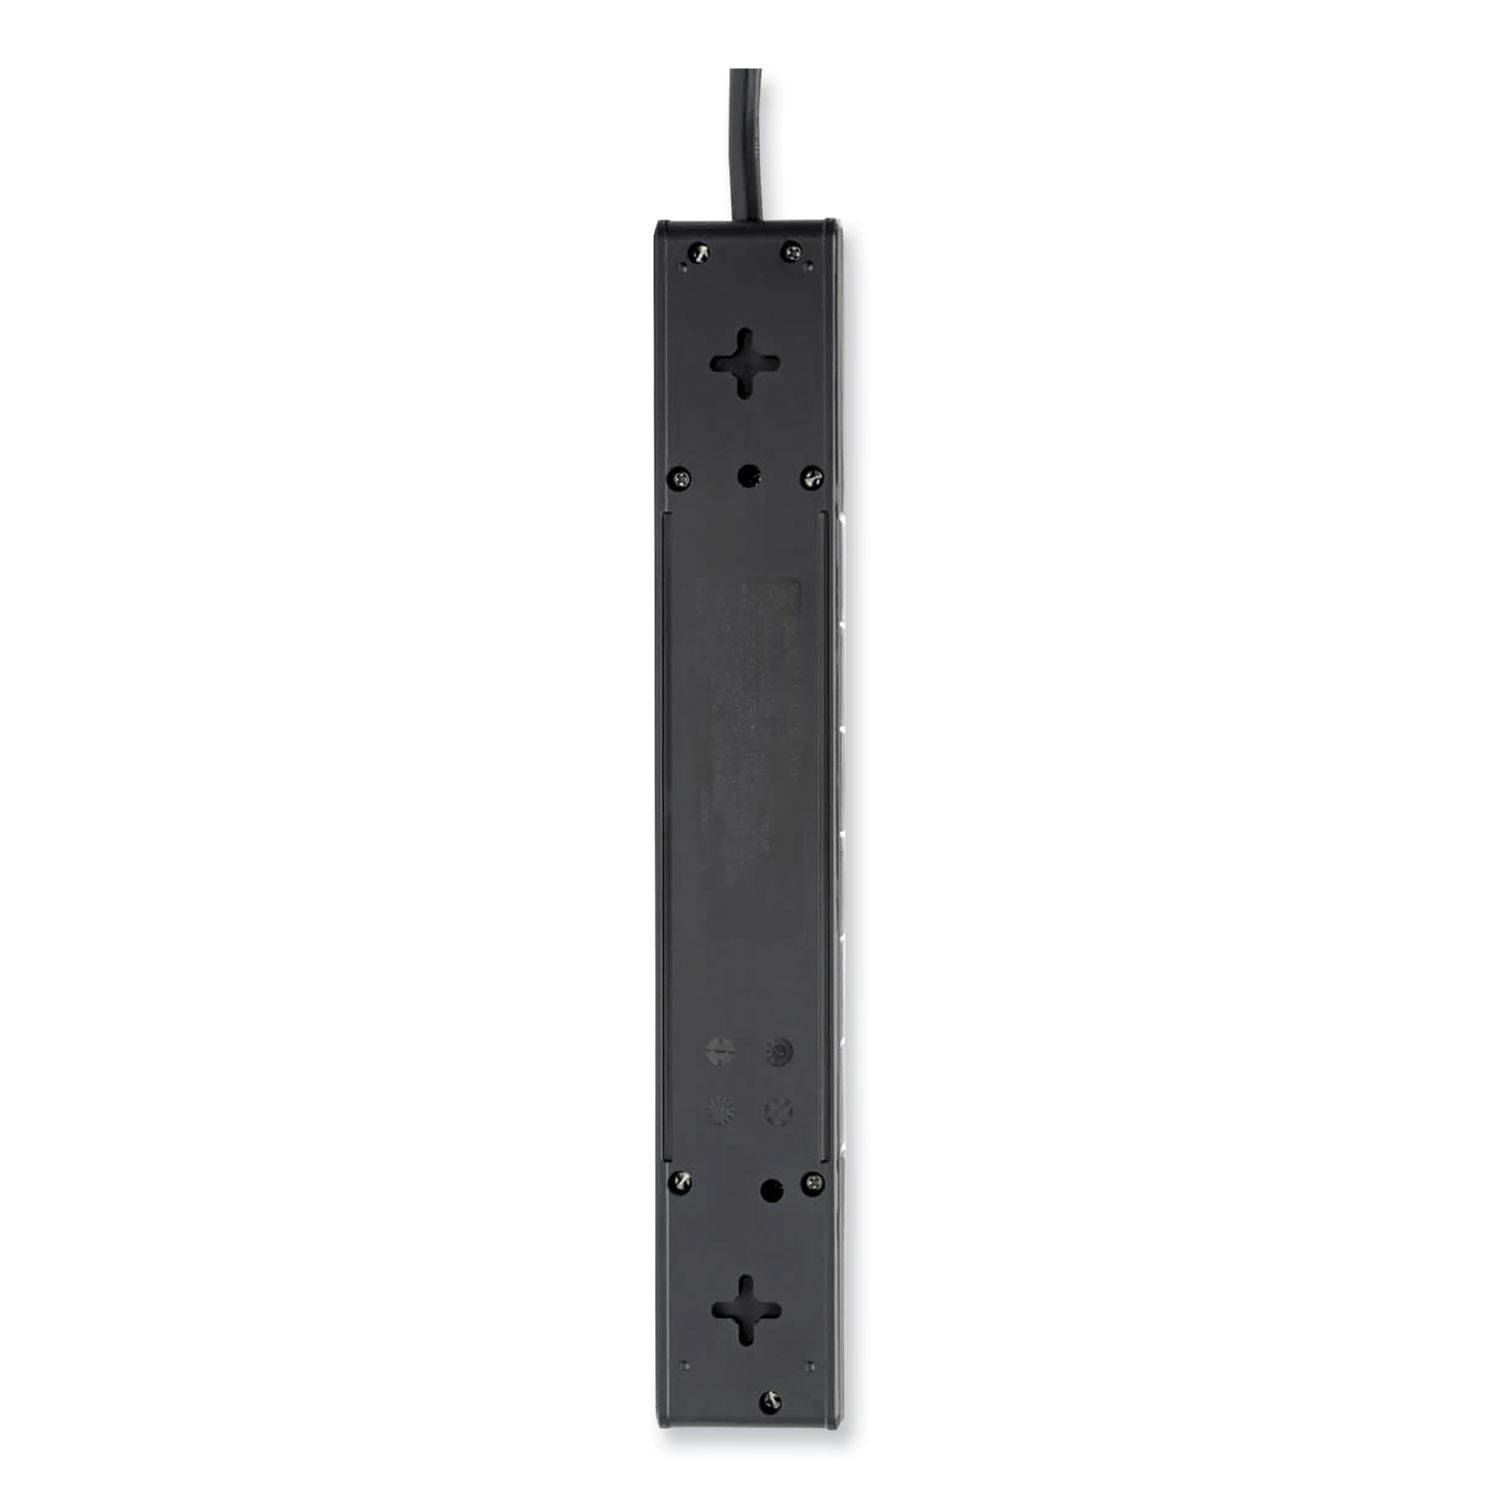 protect-it!-surge-protector-6-ac-outlets-2-usb-ports-8-ft-cord-1080-j-black_trptlp608rusbb - 2